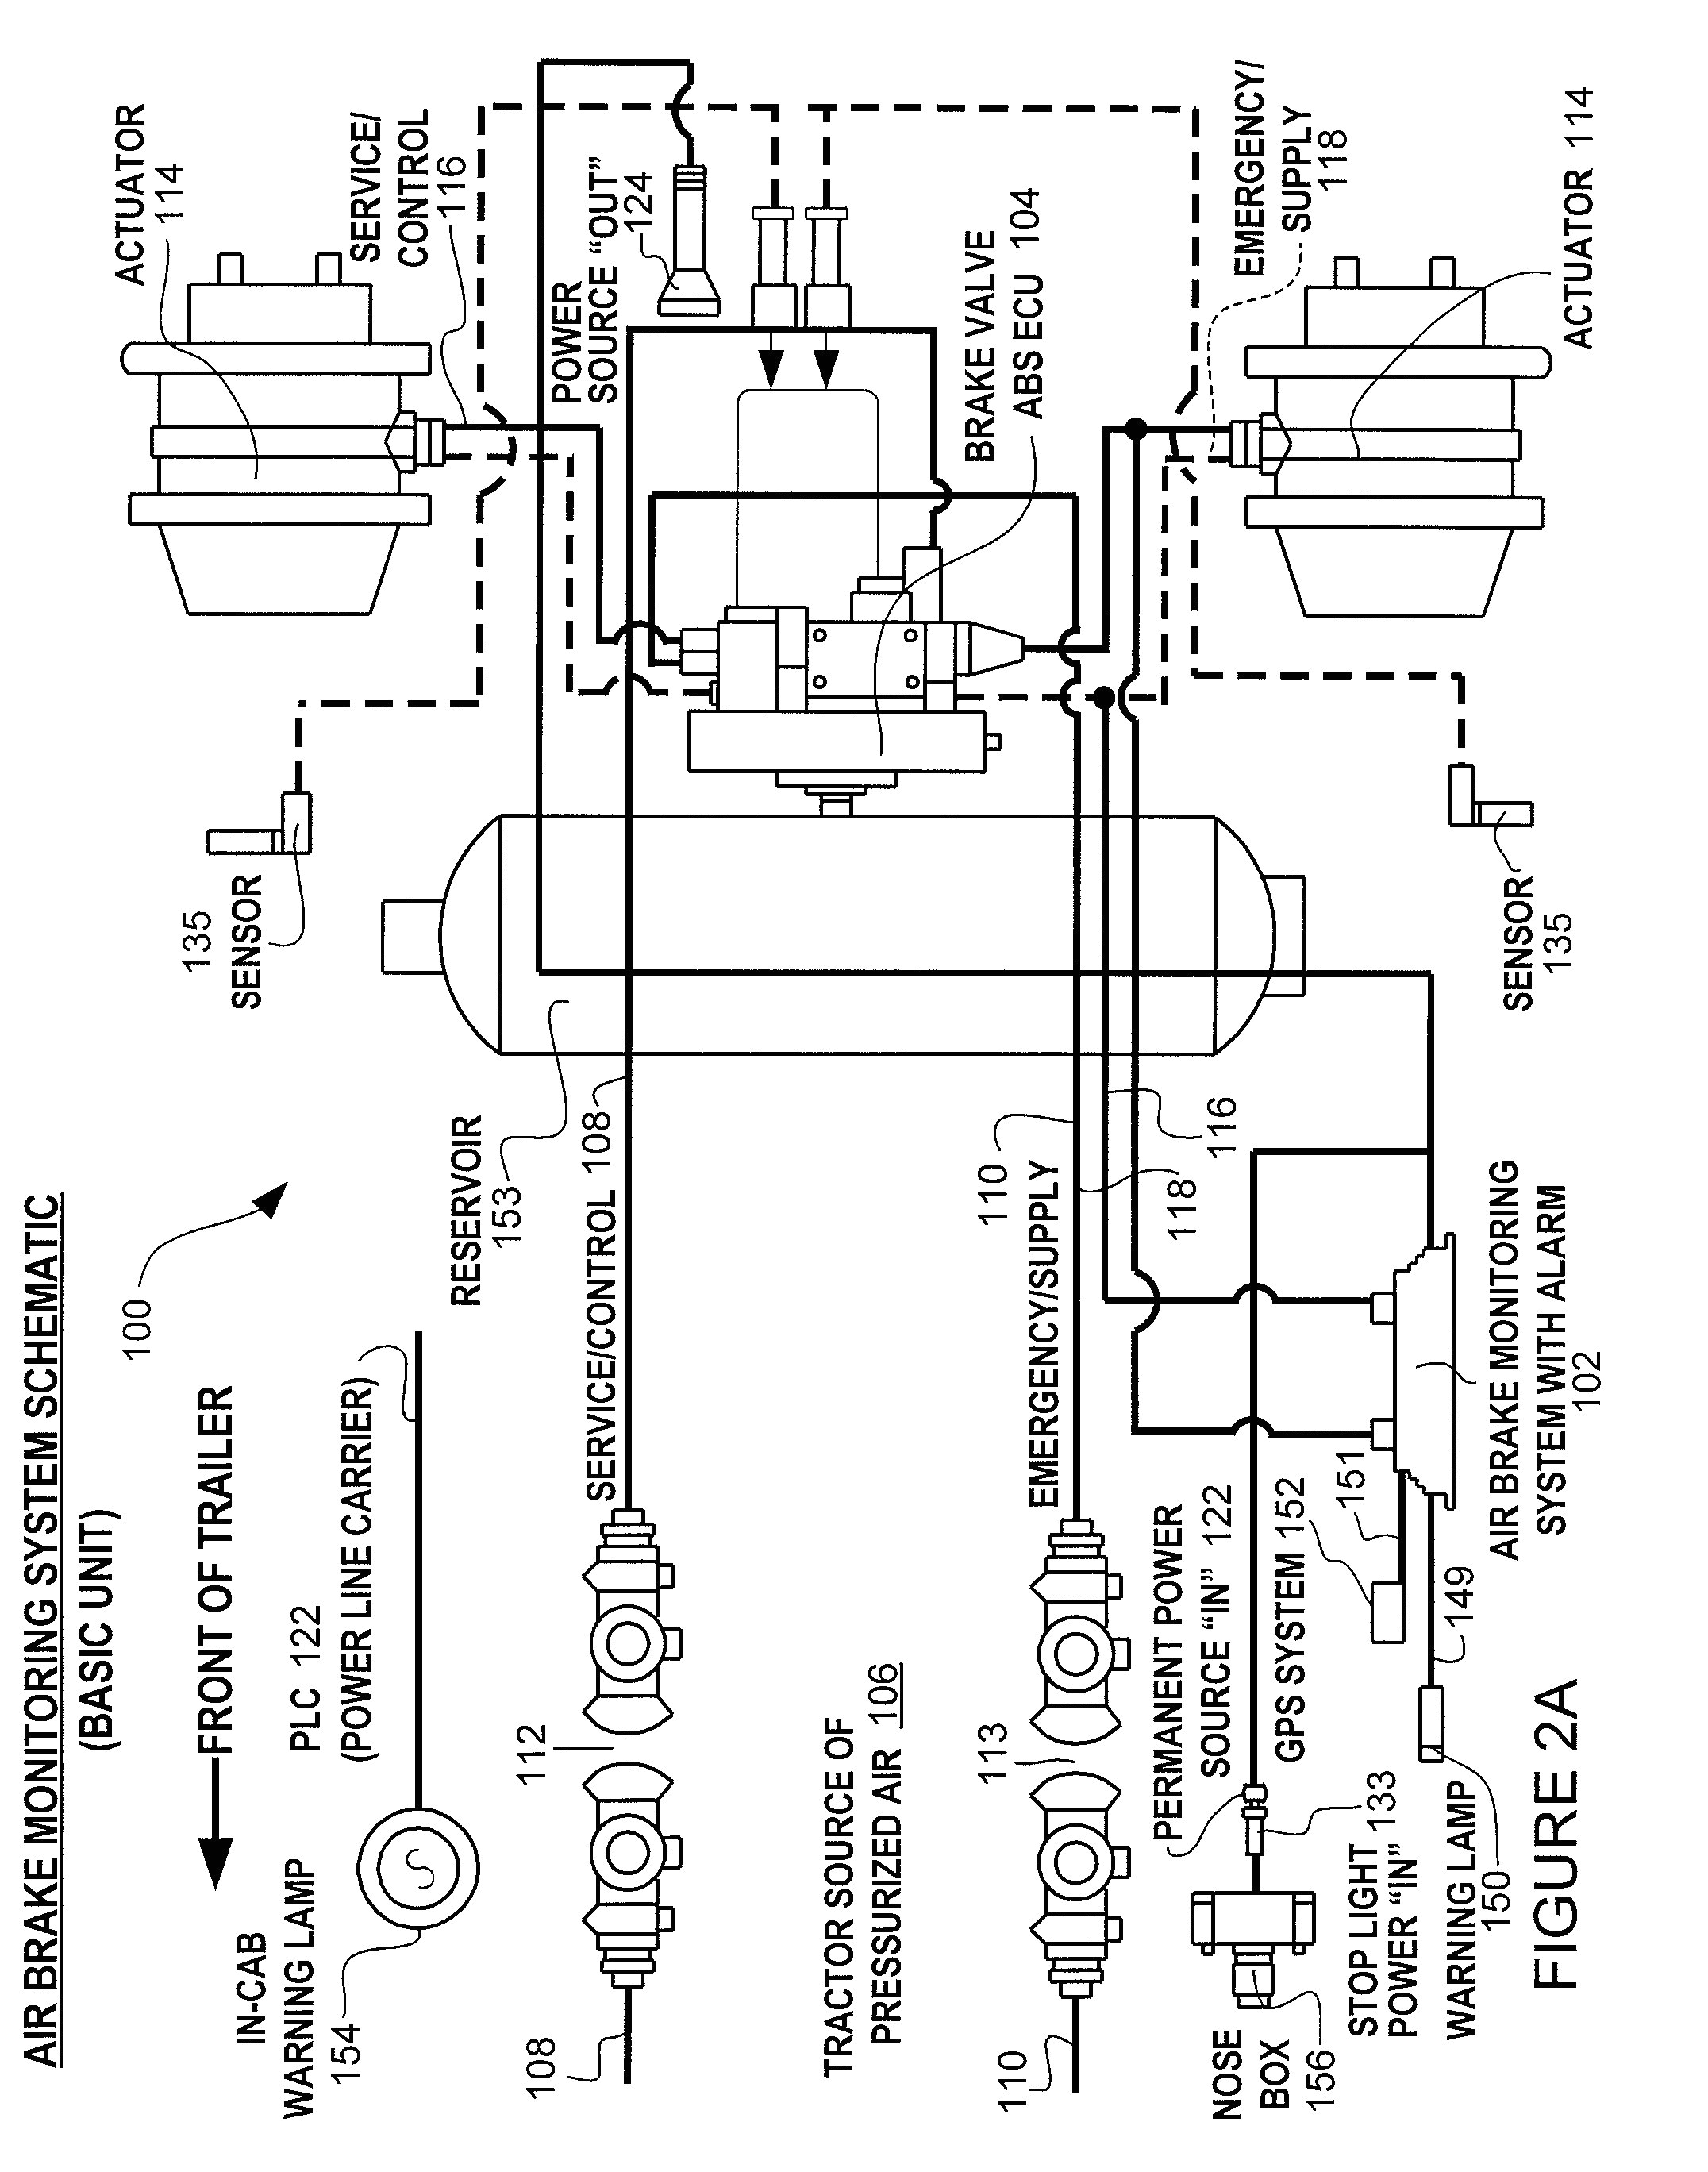 wabco abs wiring harness wiring diagram show freightliner abs wiring wiring diagram inside wabco abs wiring